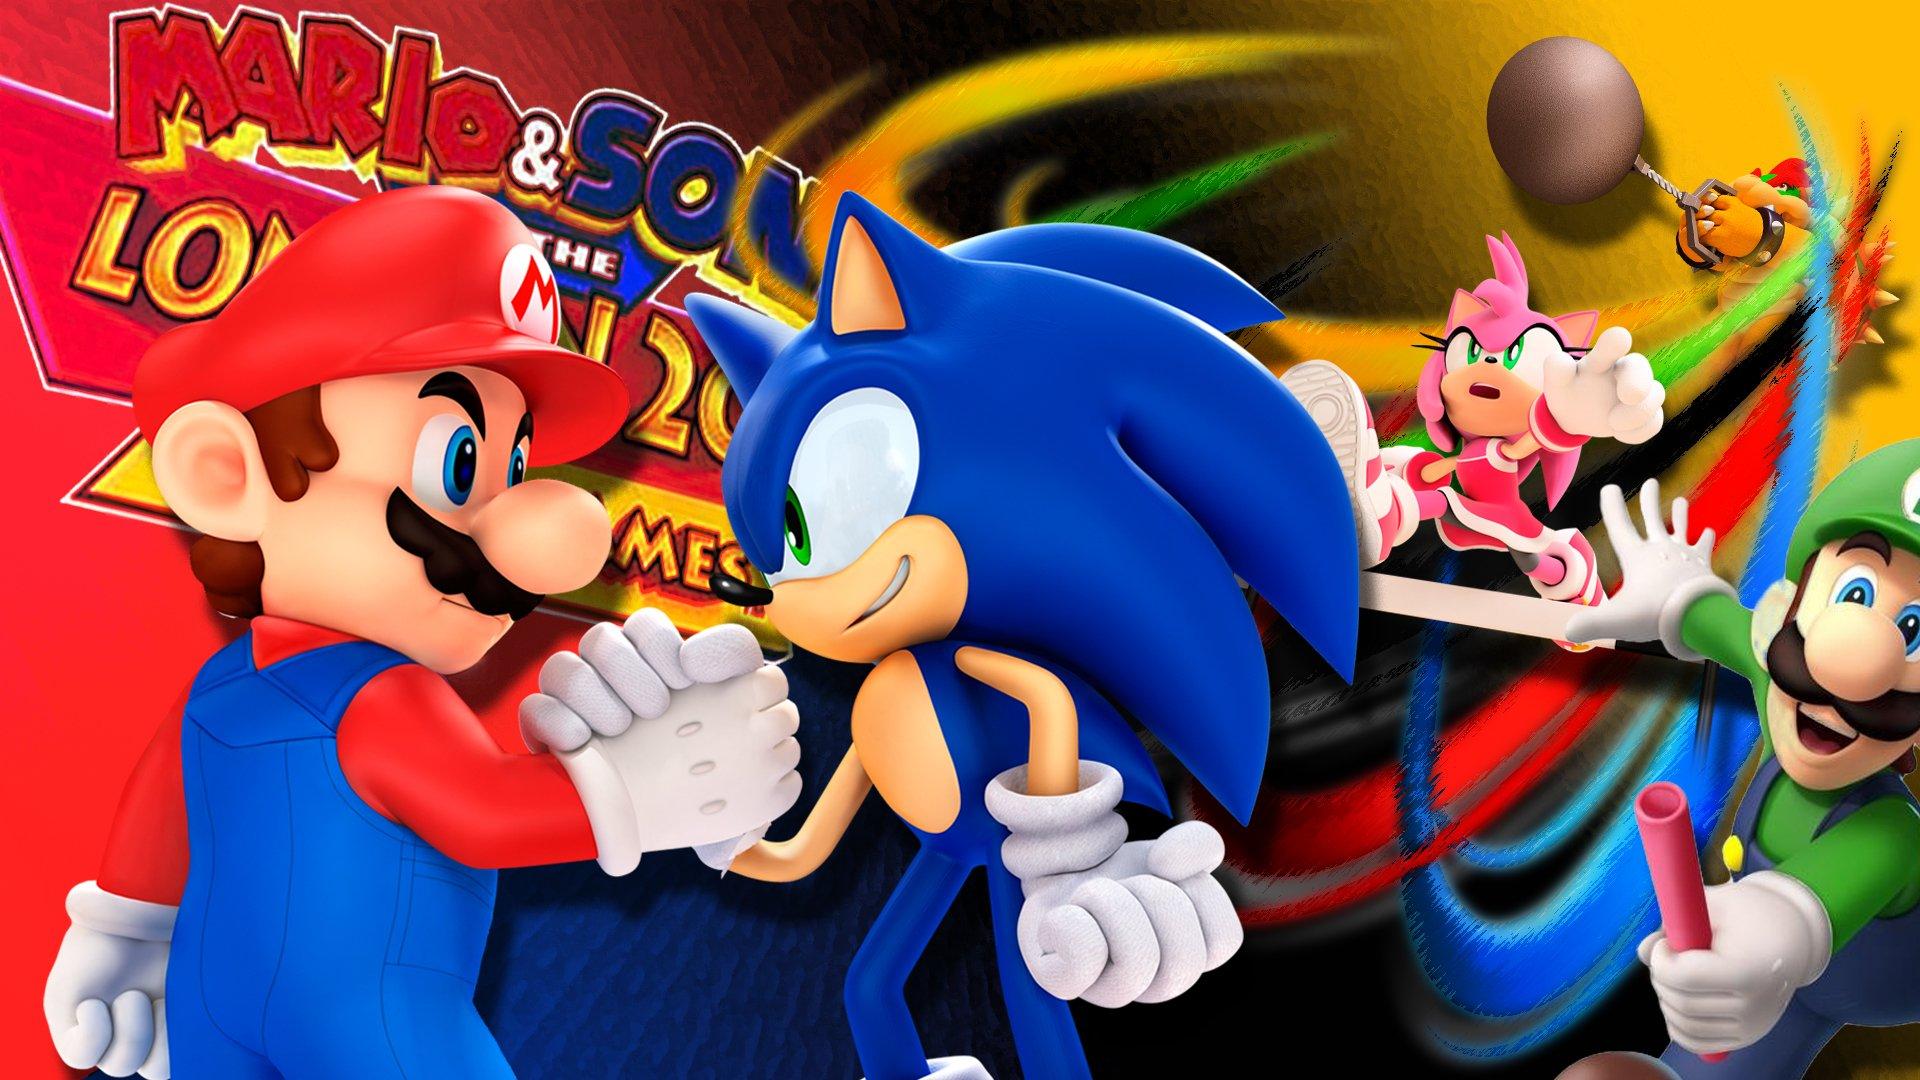 Mario & Sonic At The London 2012 Olympic Games HD Wallpaper